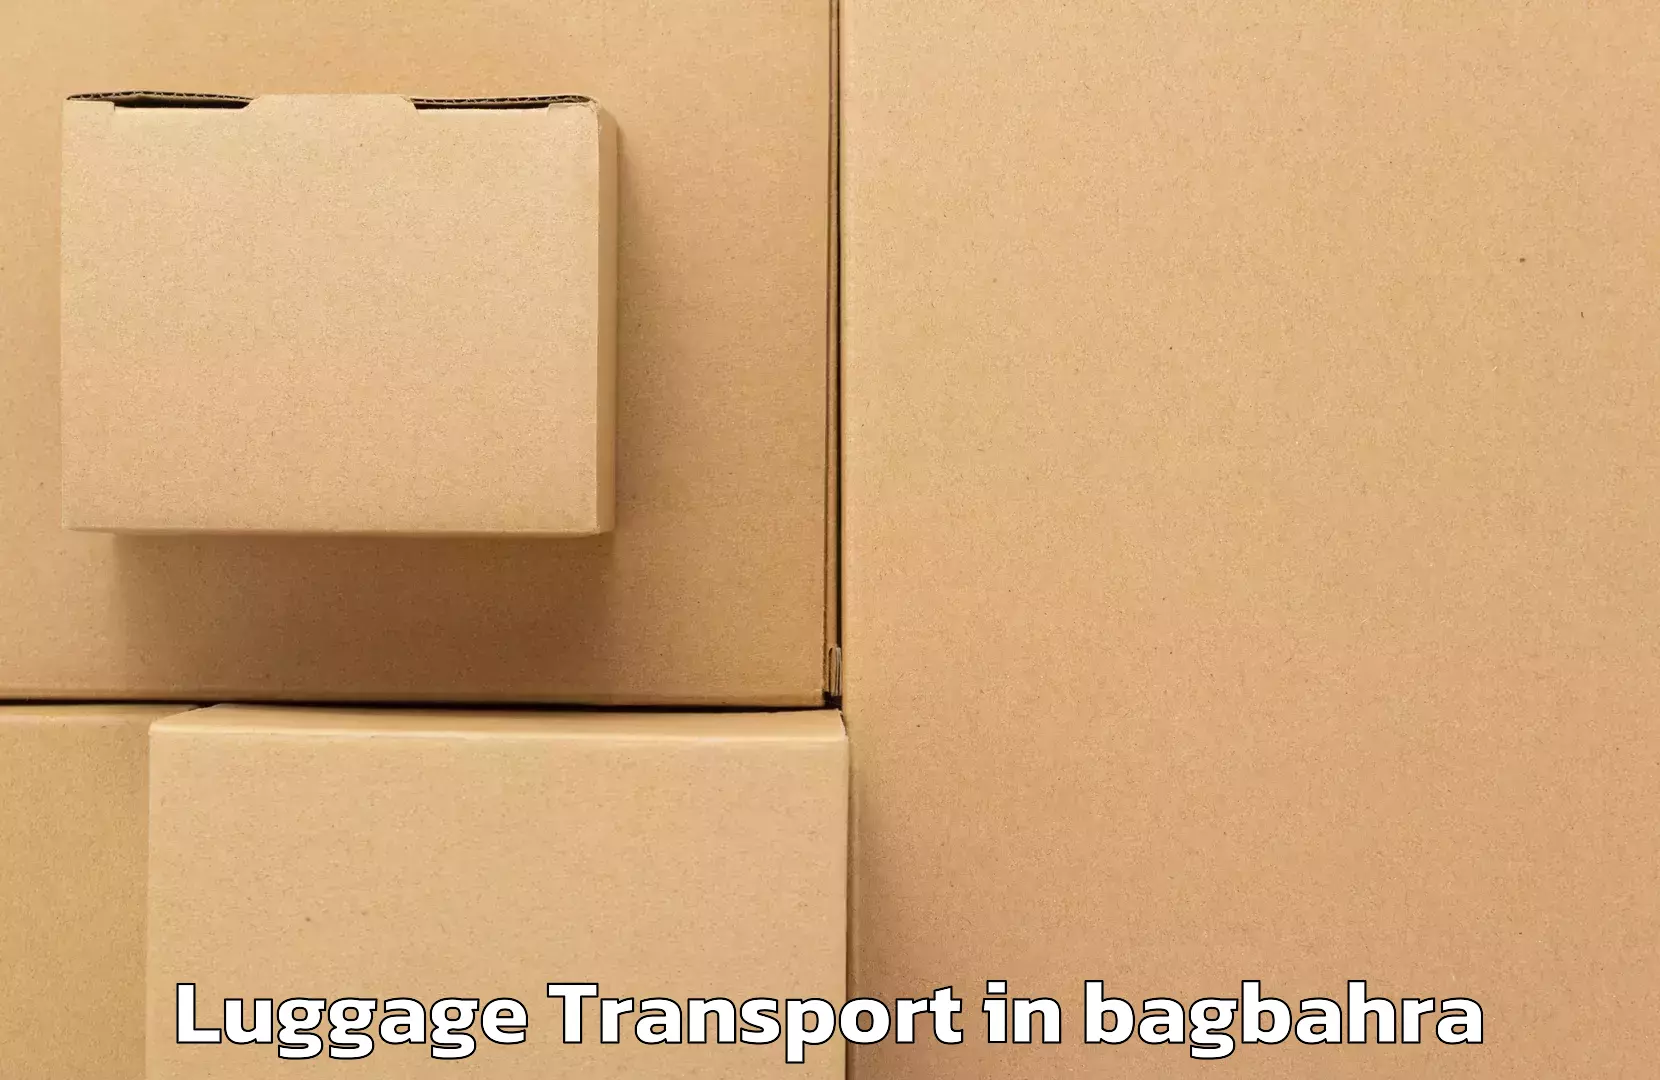 Luggage shipment tracking in bagbahra